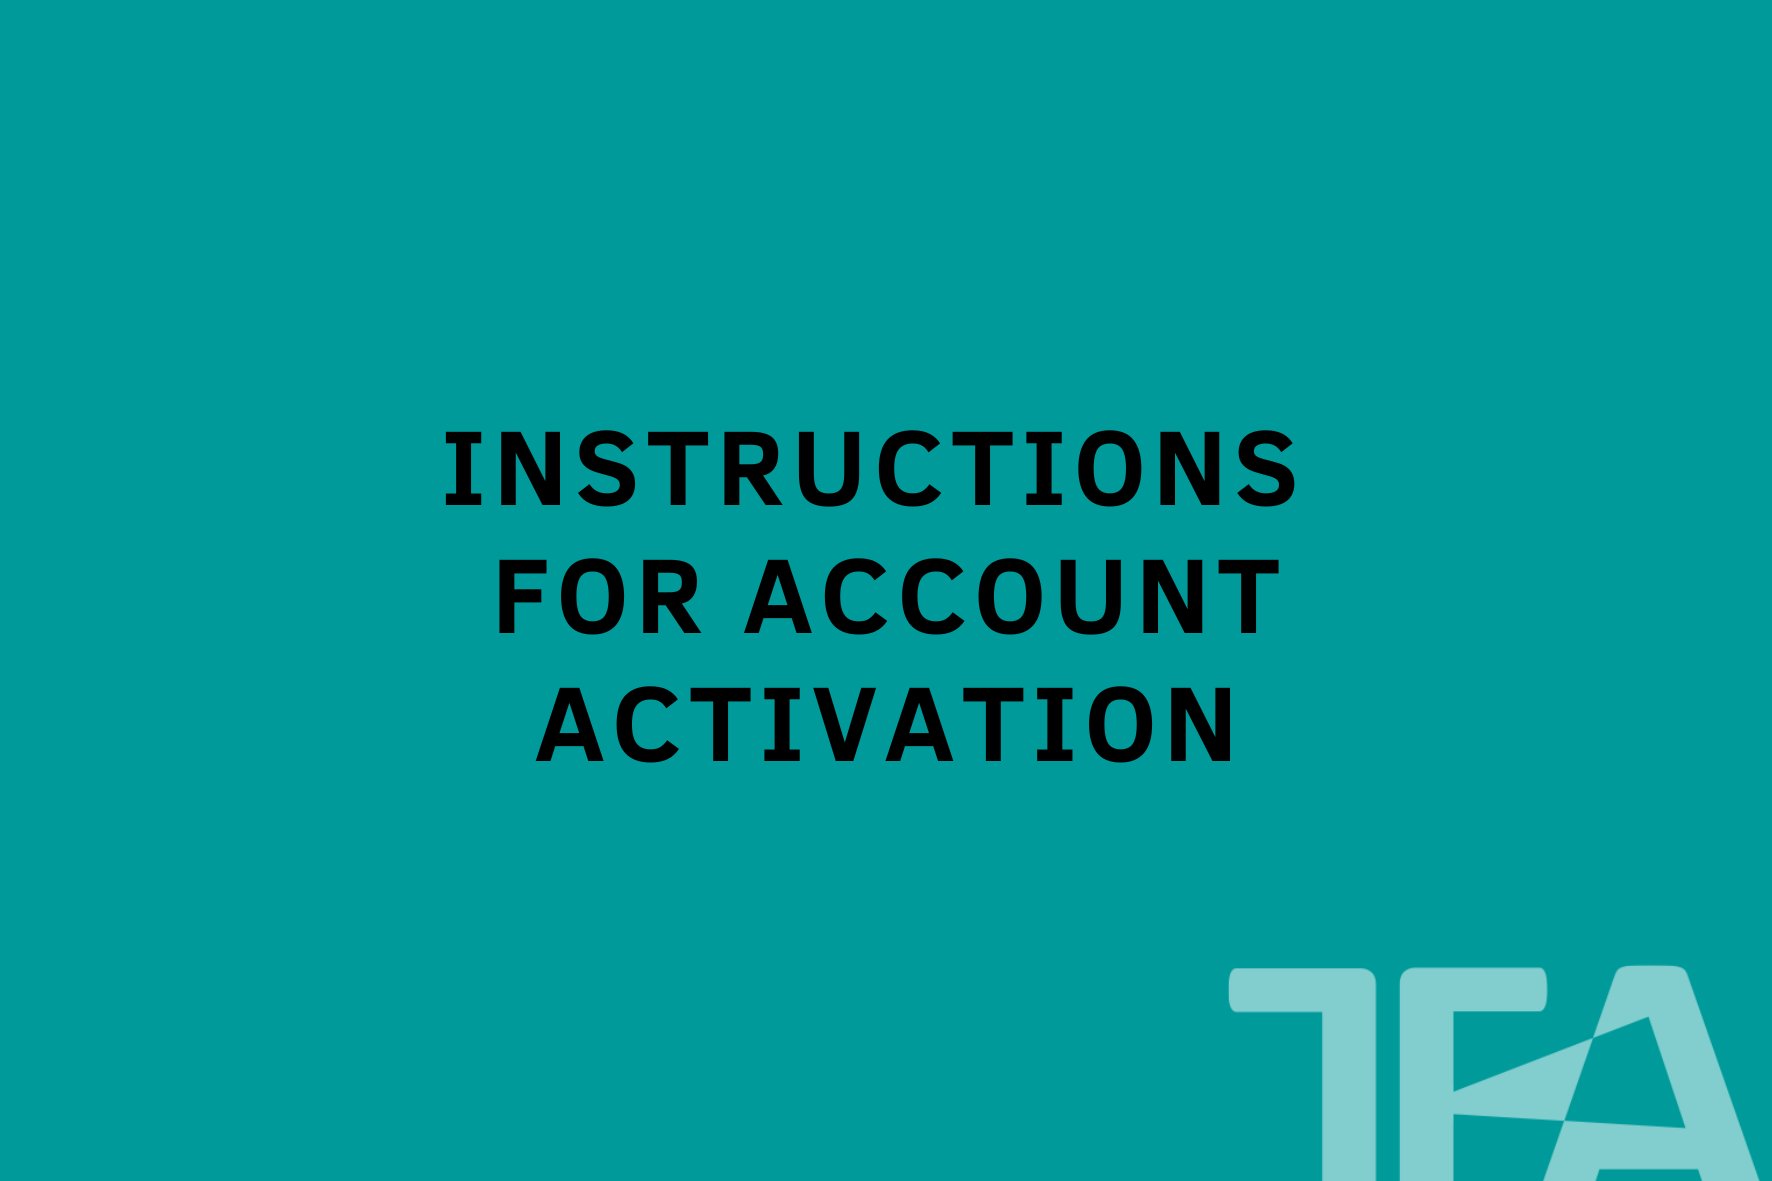 Instructions for account activation